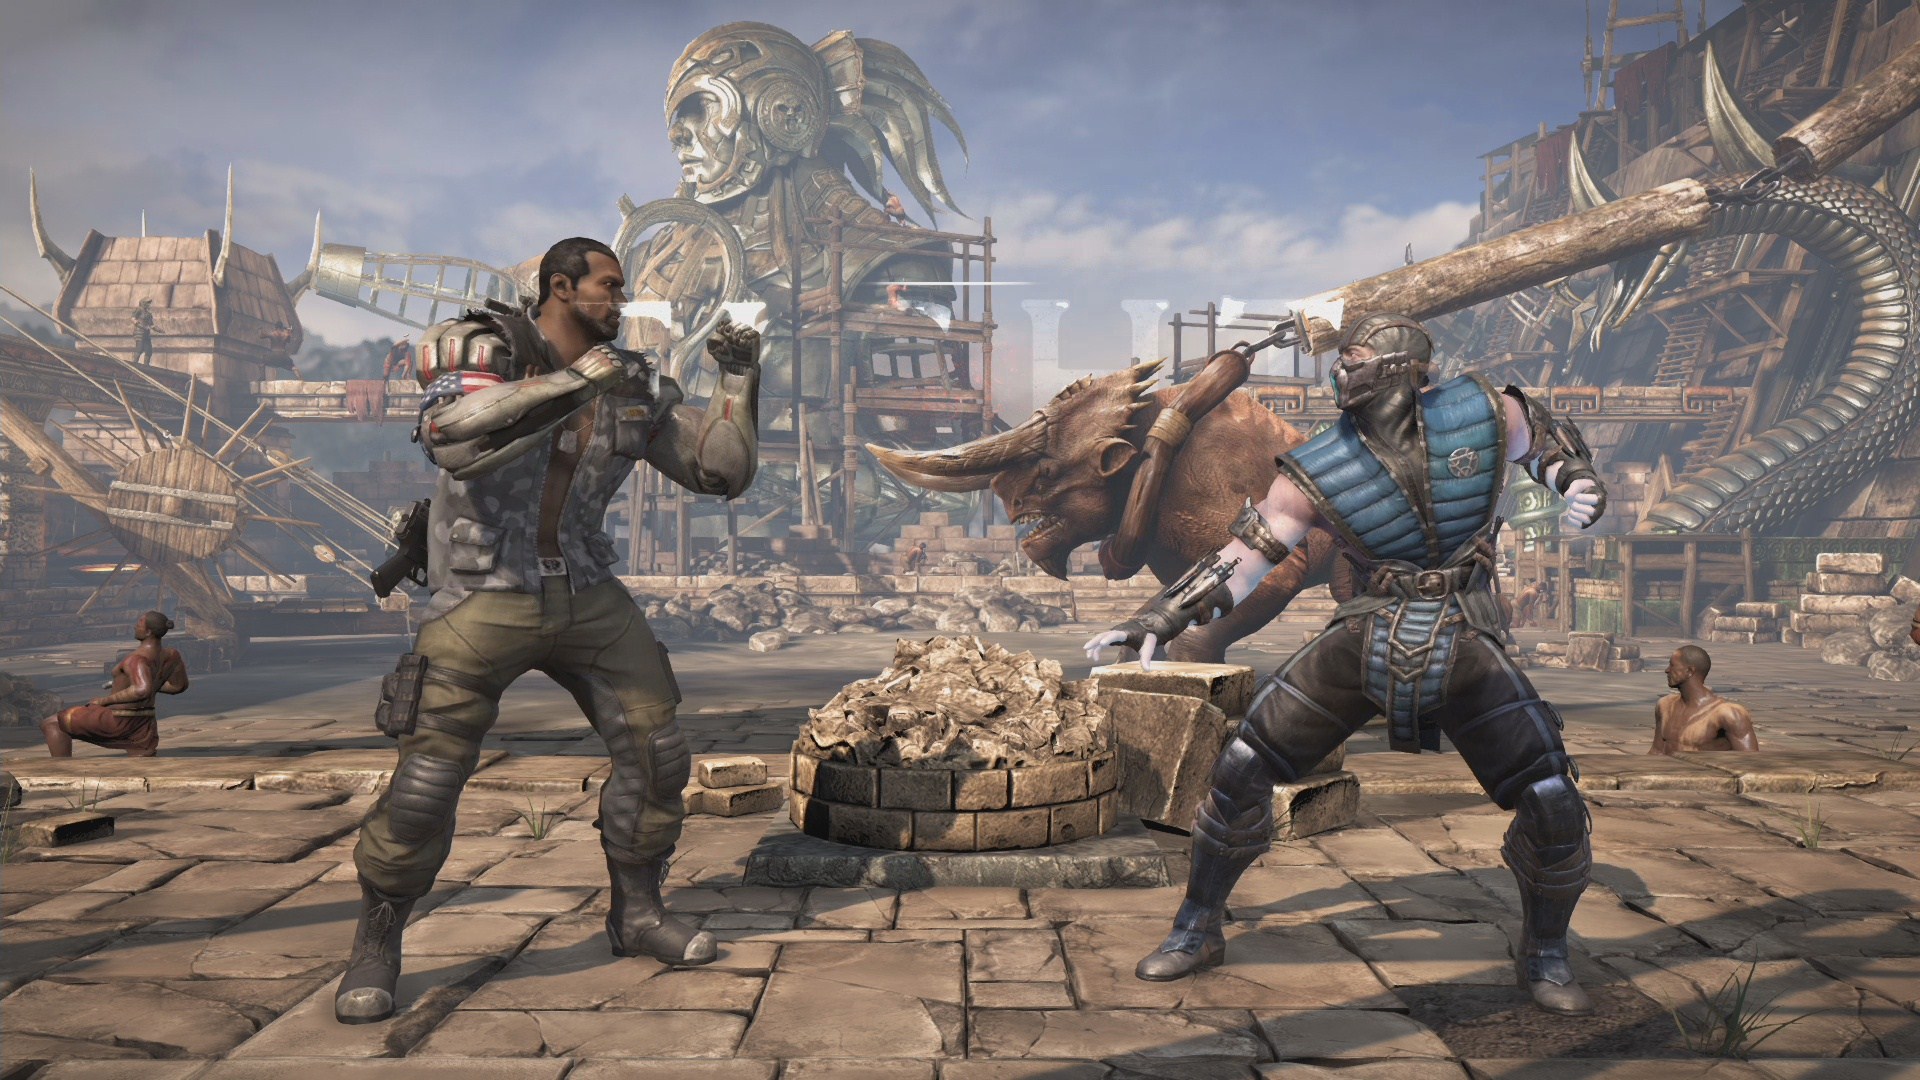 Mortal Kombat X heads to Xbox One, PlayStation 4 and PC in 2015